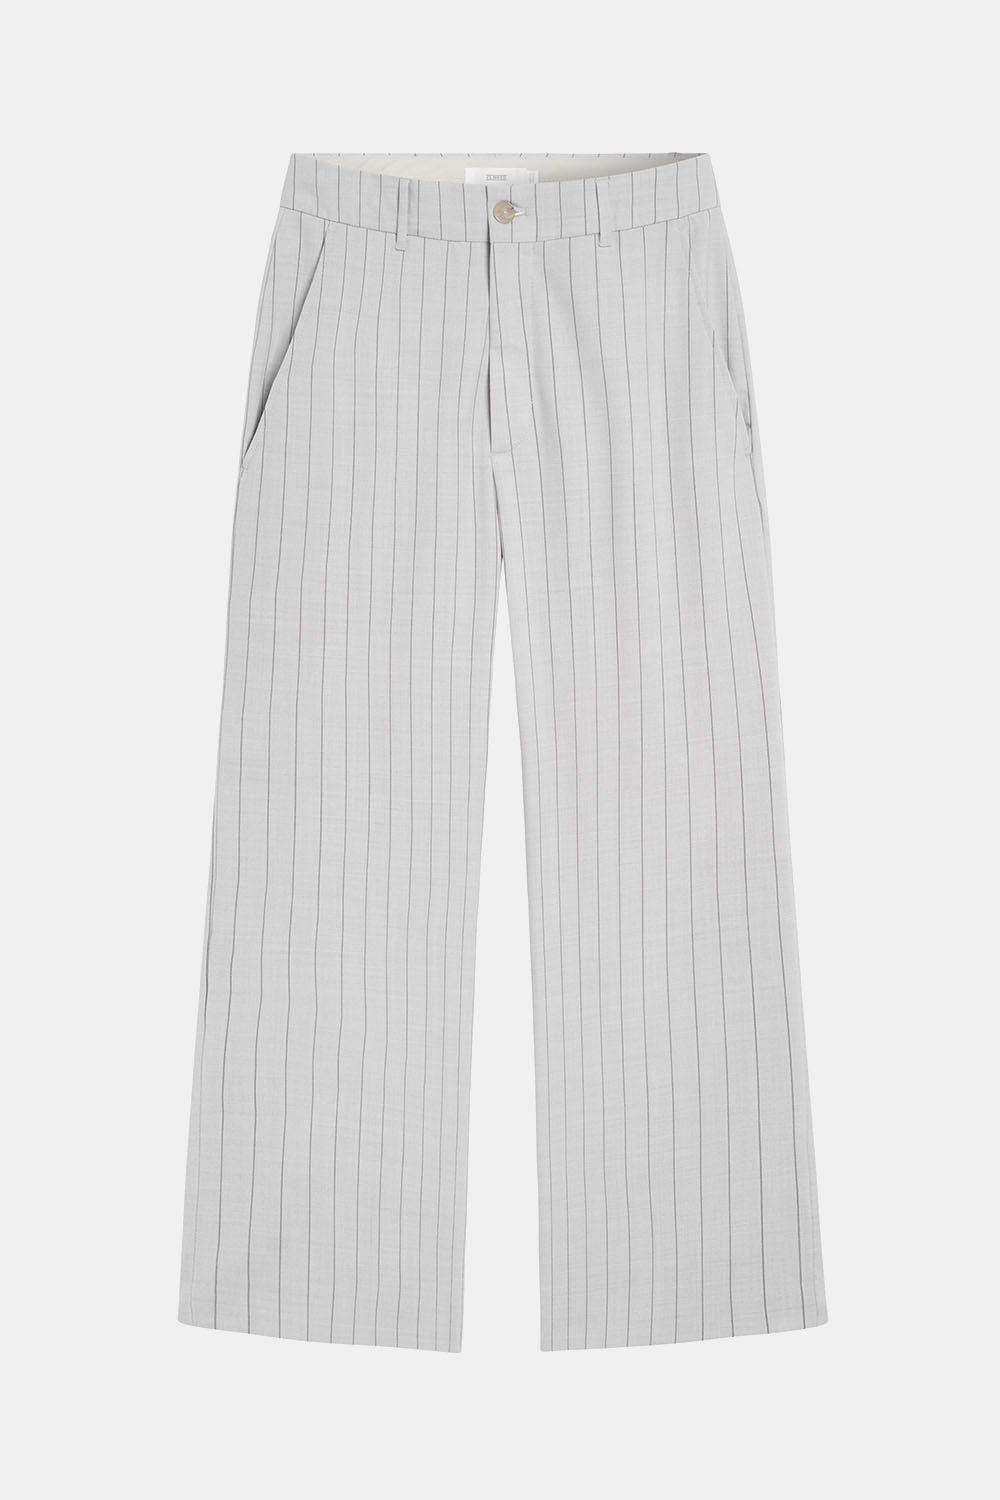 Closed Barton Pants In Grey Marble